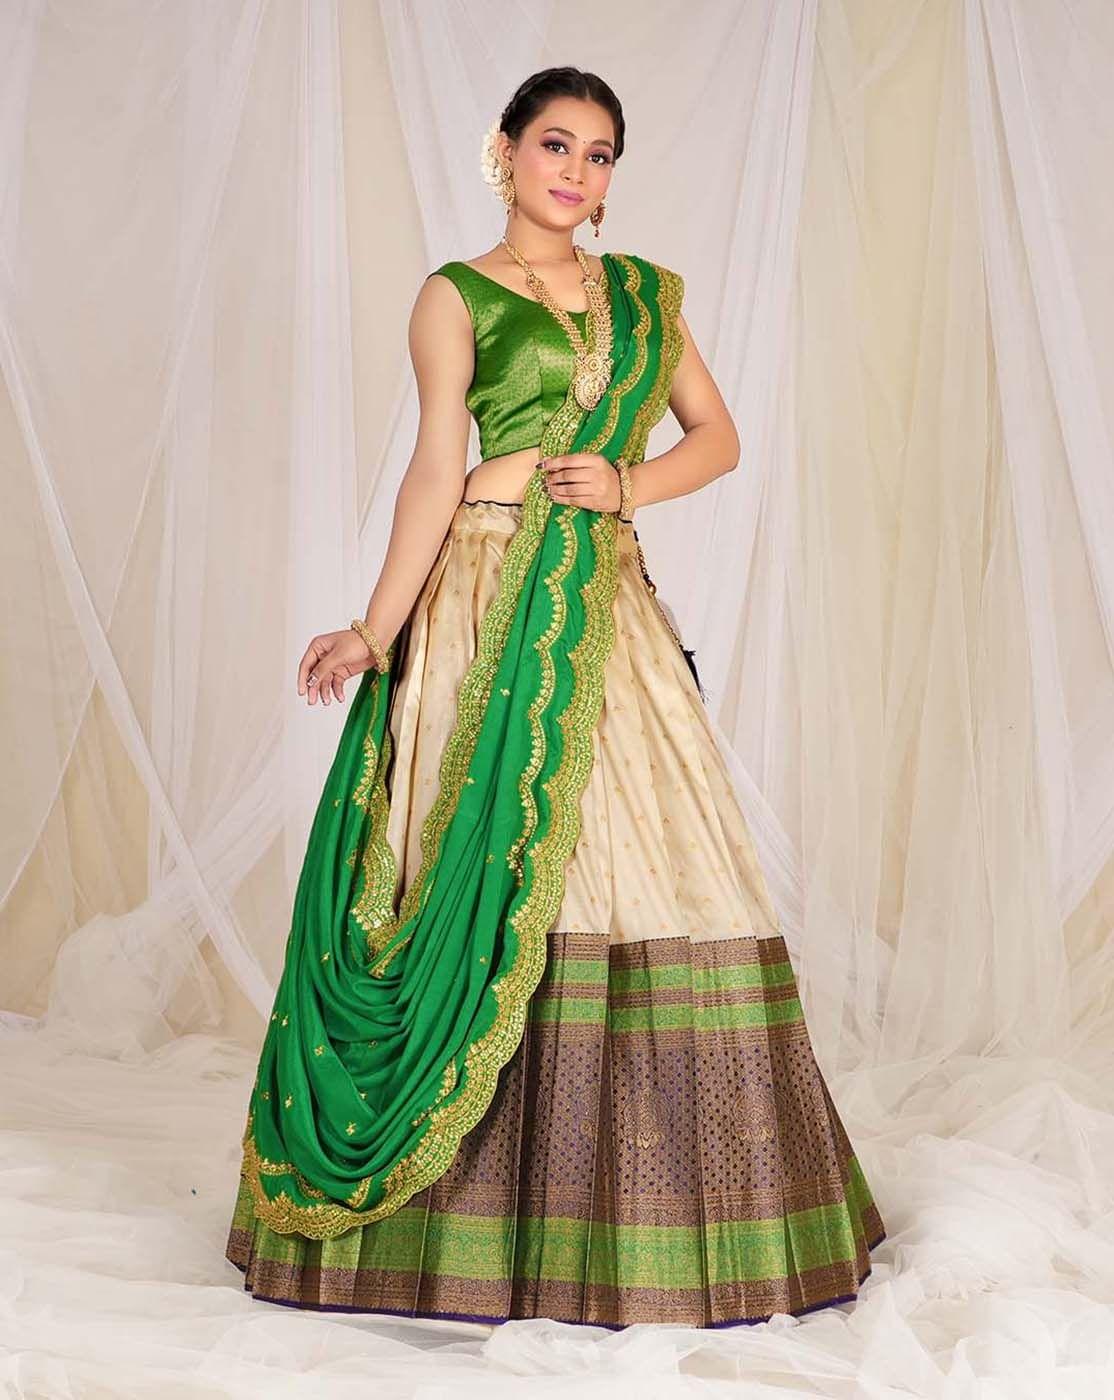 50 Latest Lehenga Blouse Designs to Try in (2022) - Tips and Beauty |  Lehenga blouse designs, Silk saree blouse designs, Latest lehenga blouse  designs